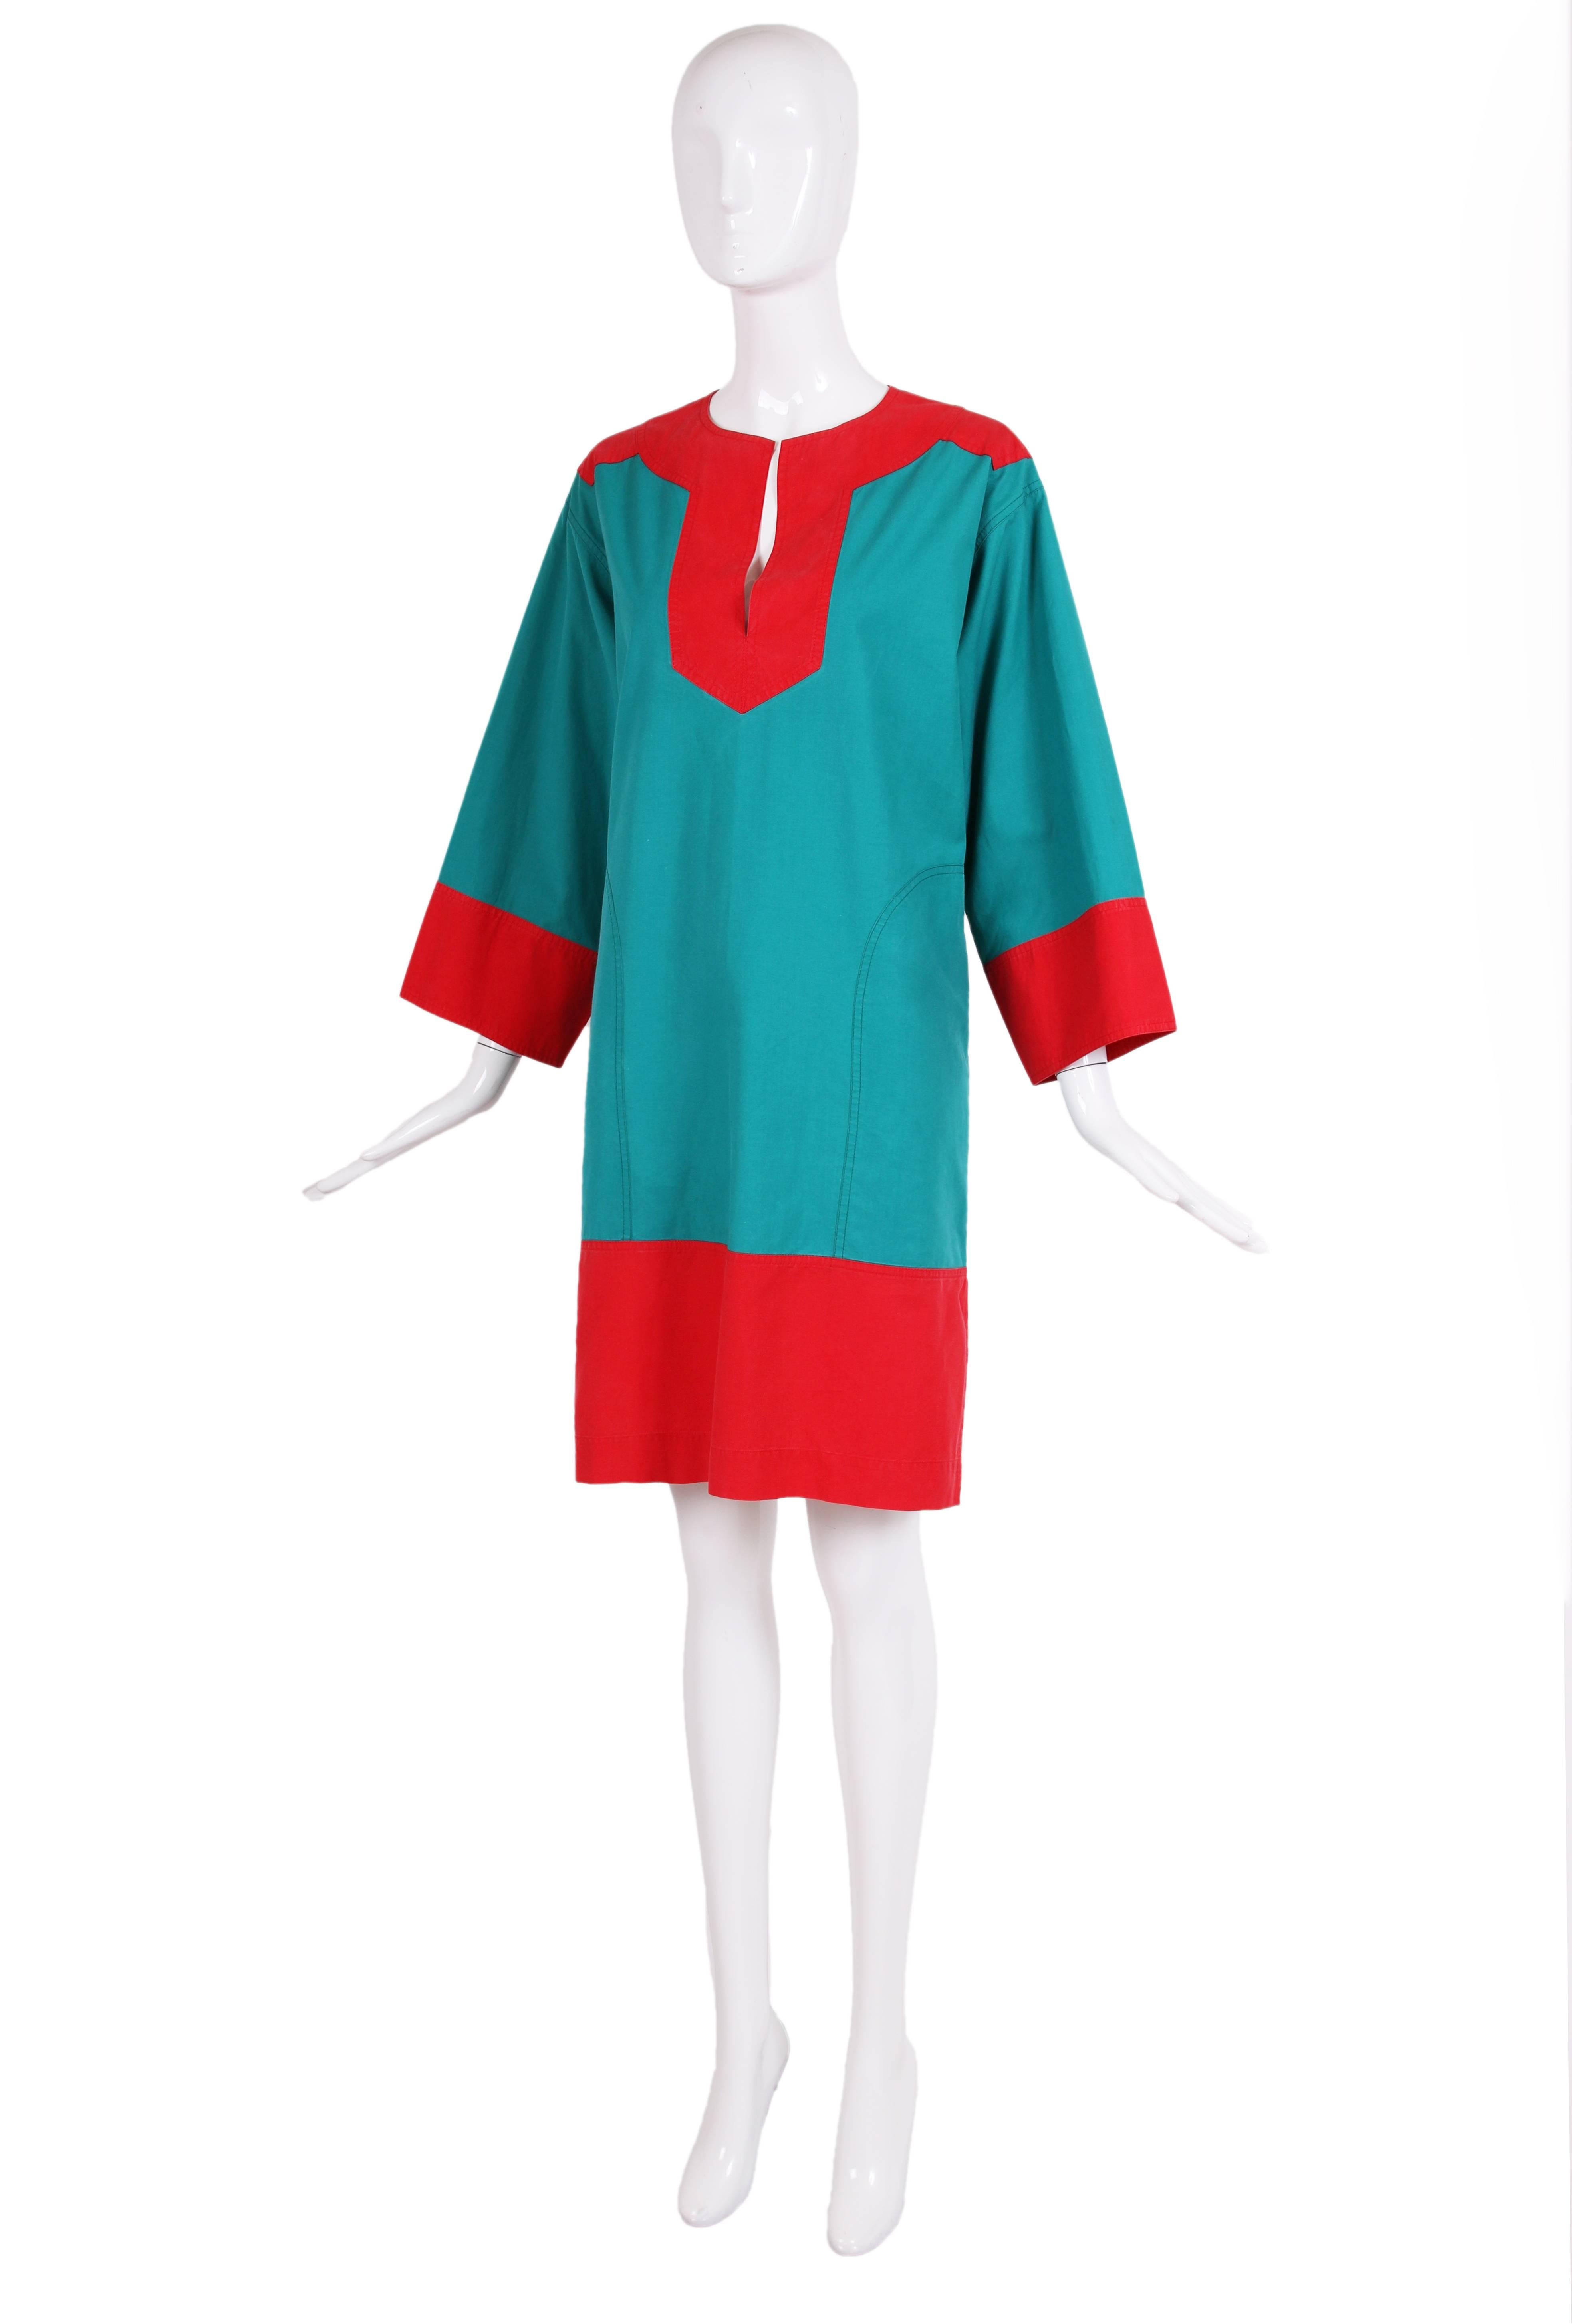 Late 1970's Yves Saint Laurent cotton green and red color block tunic dress with 3/4 sleeves and two side pockets. In excellent condition - size tag 38. Please consult measurements as this seems larger than a contemporary size